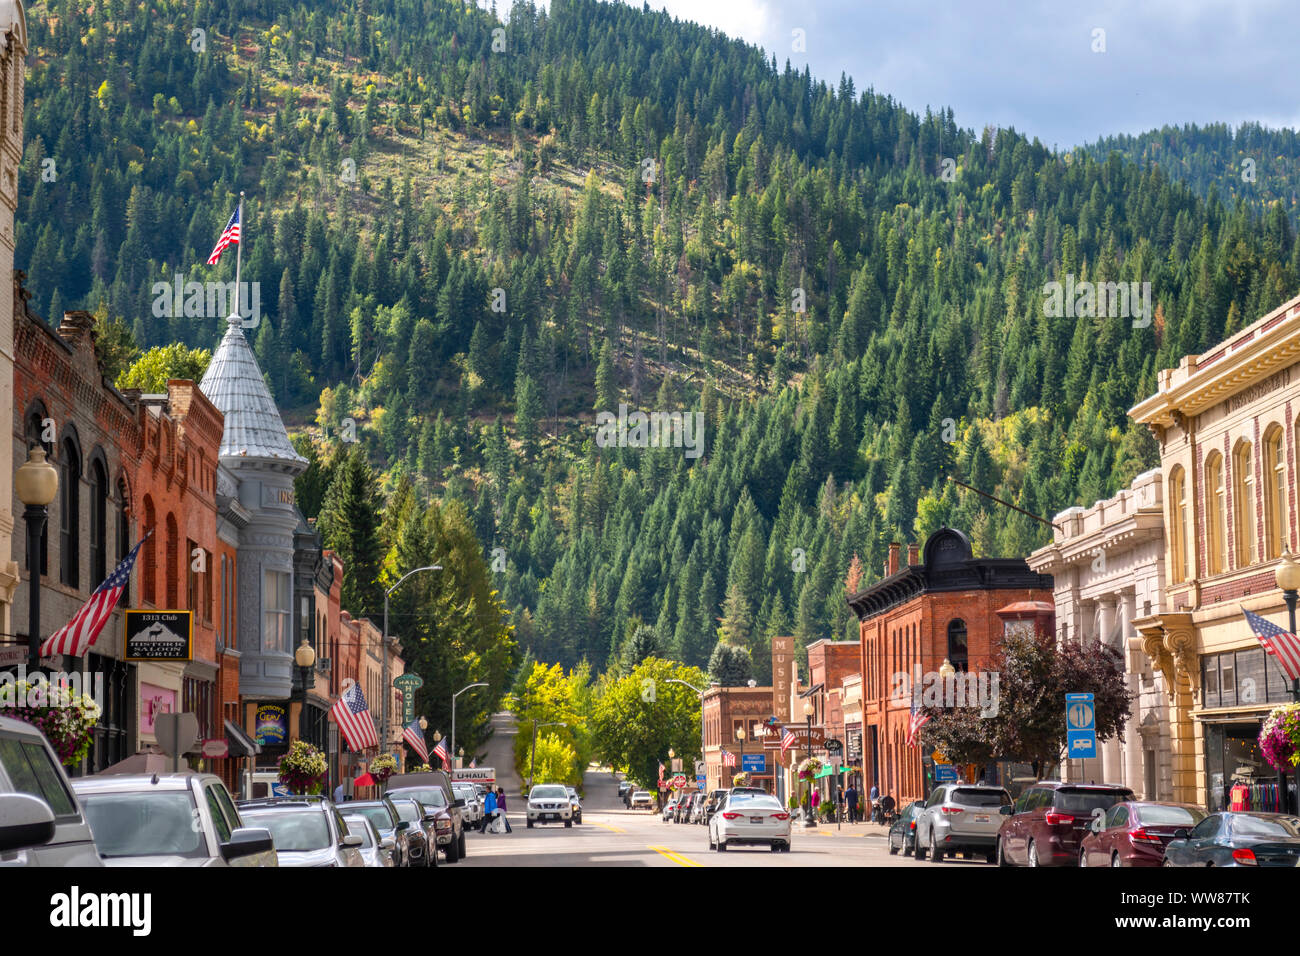 The Main Street which runs through the historic 1800's mining town of Wallace, Idaho, part of the Superfund site in Silver Valley, Idaho, USA. Stock Photo